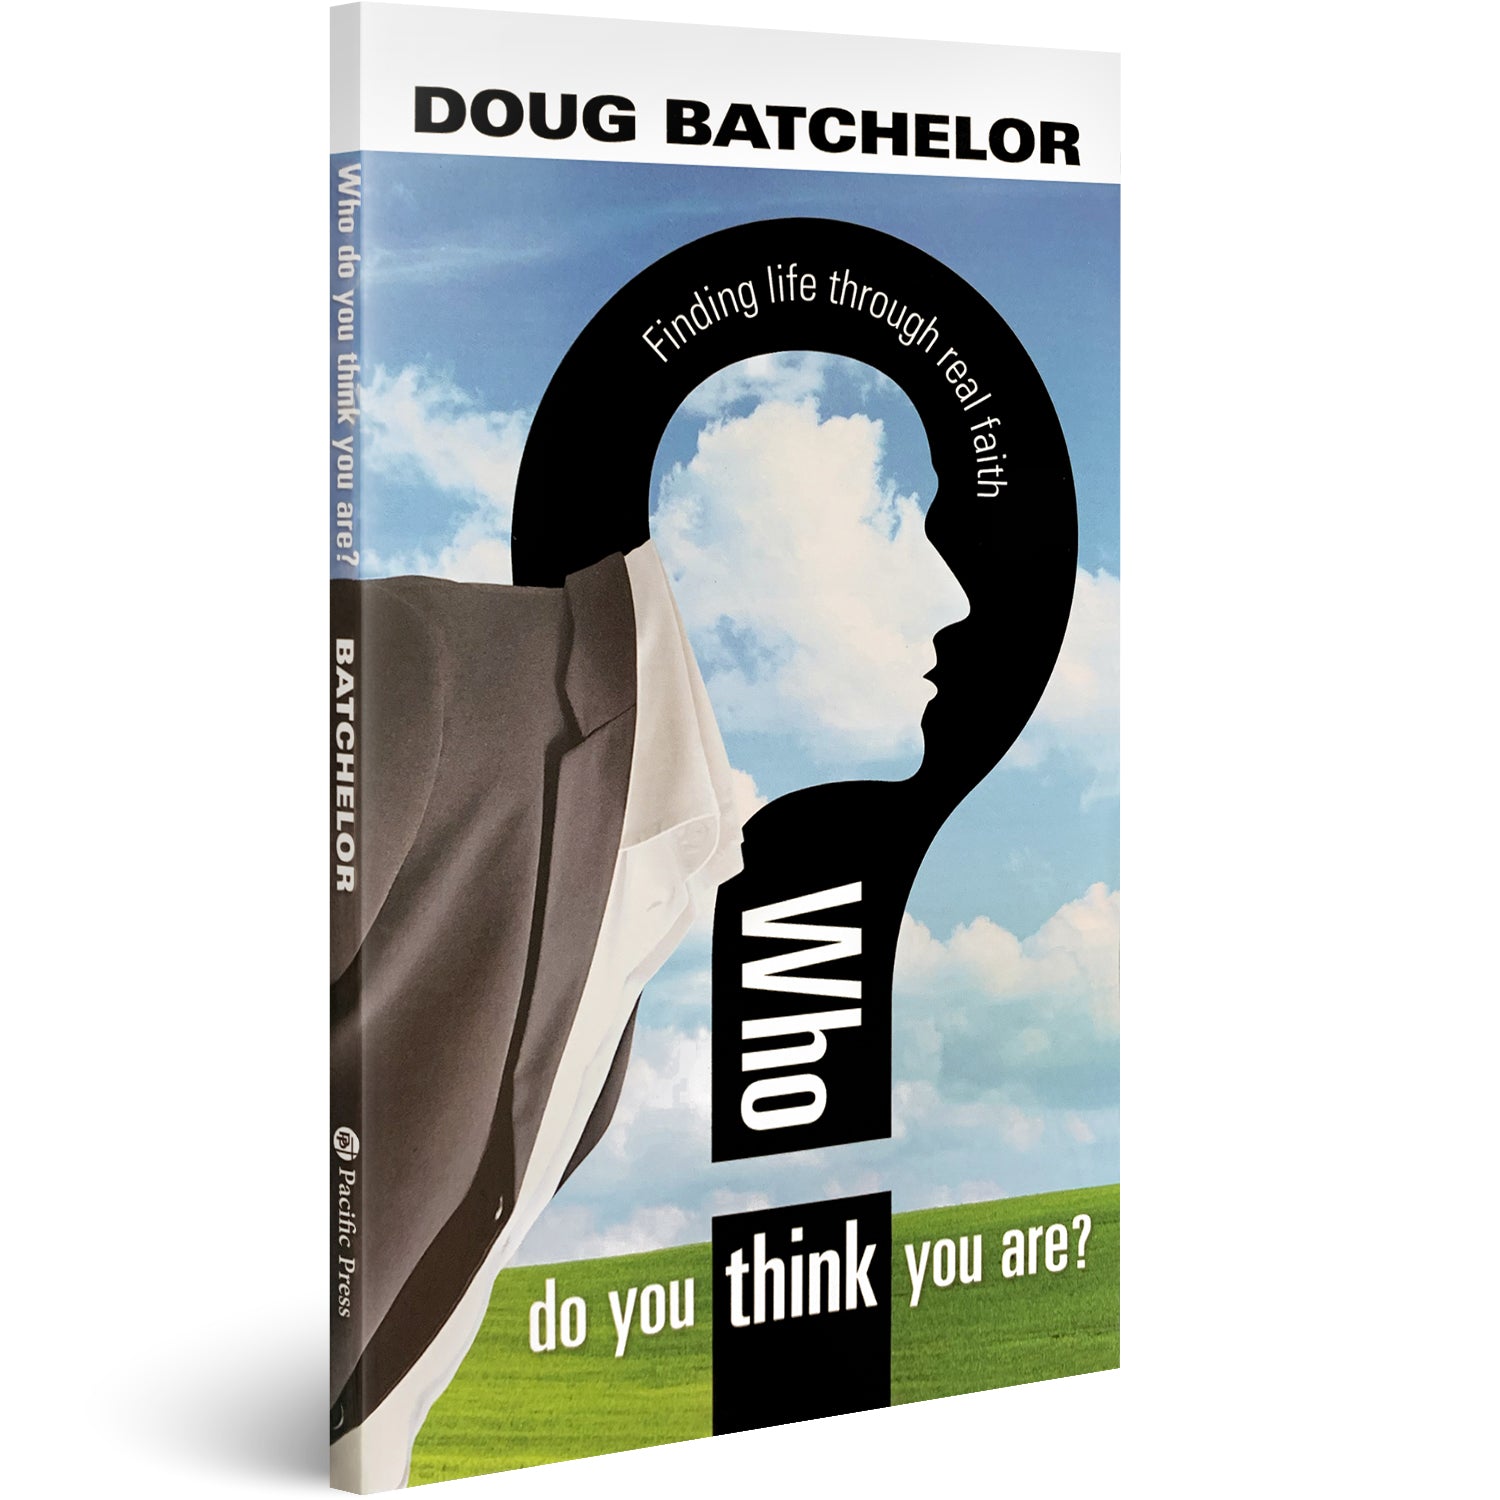 Who Do You Think You Are? by Doug Batchelor